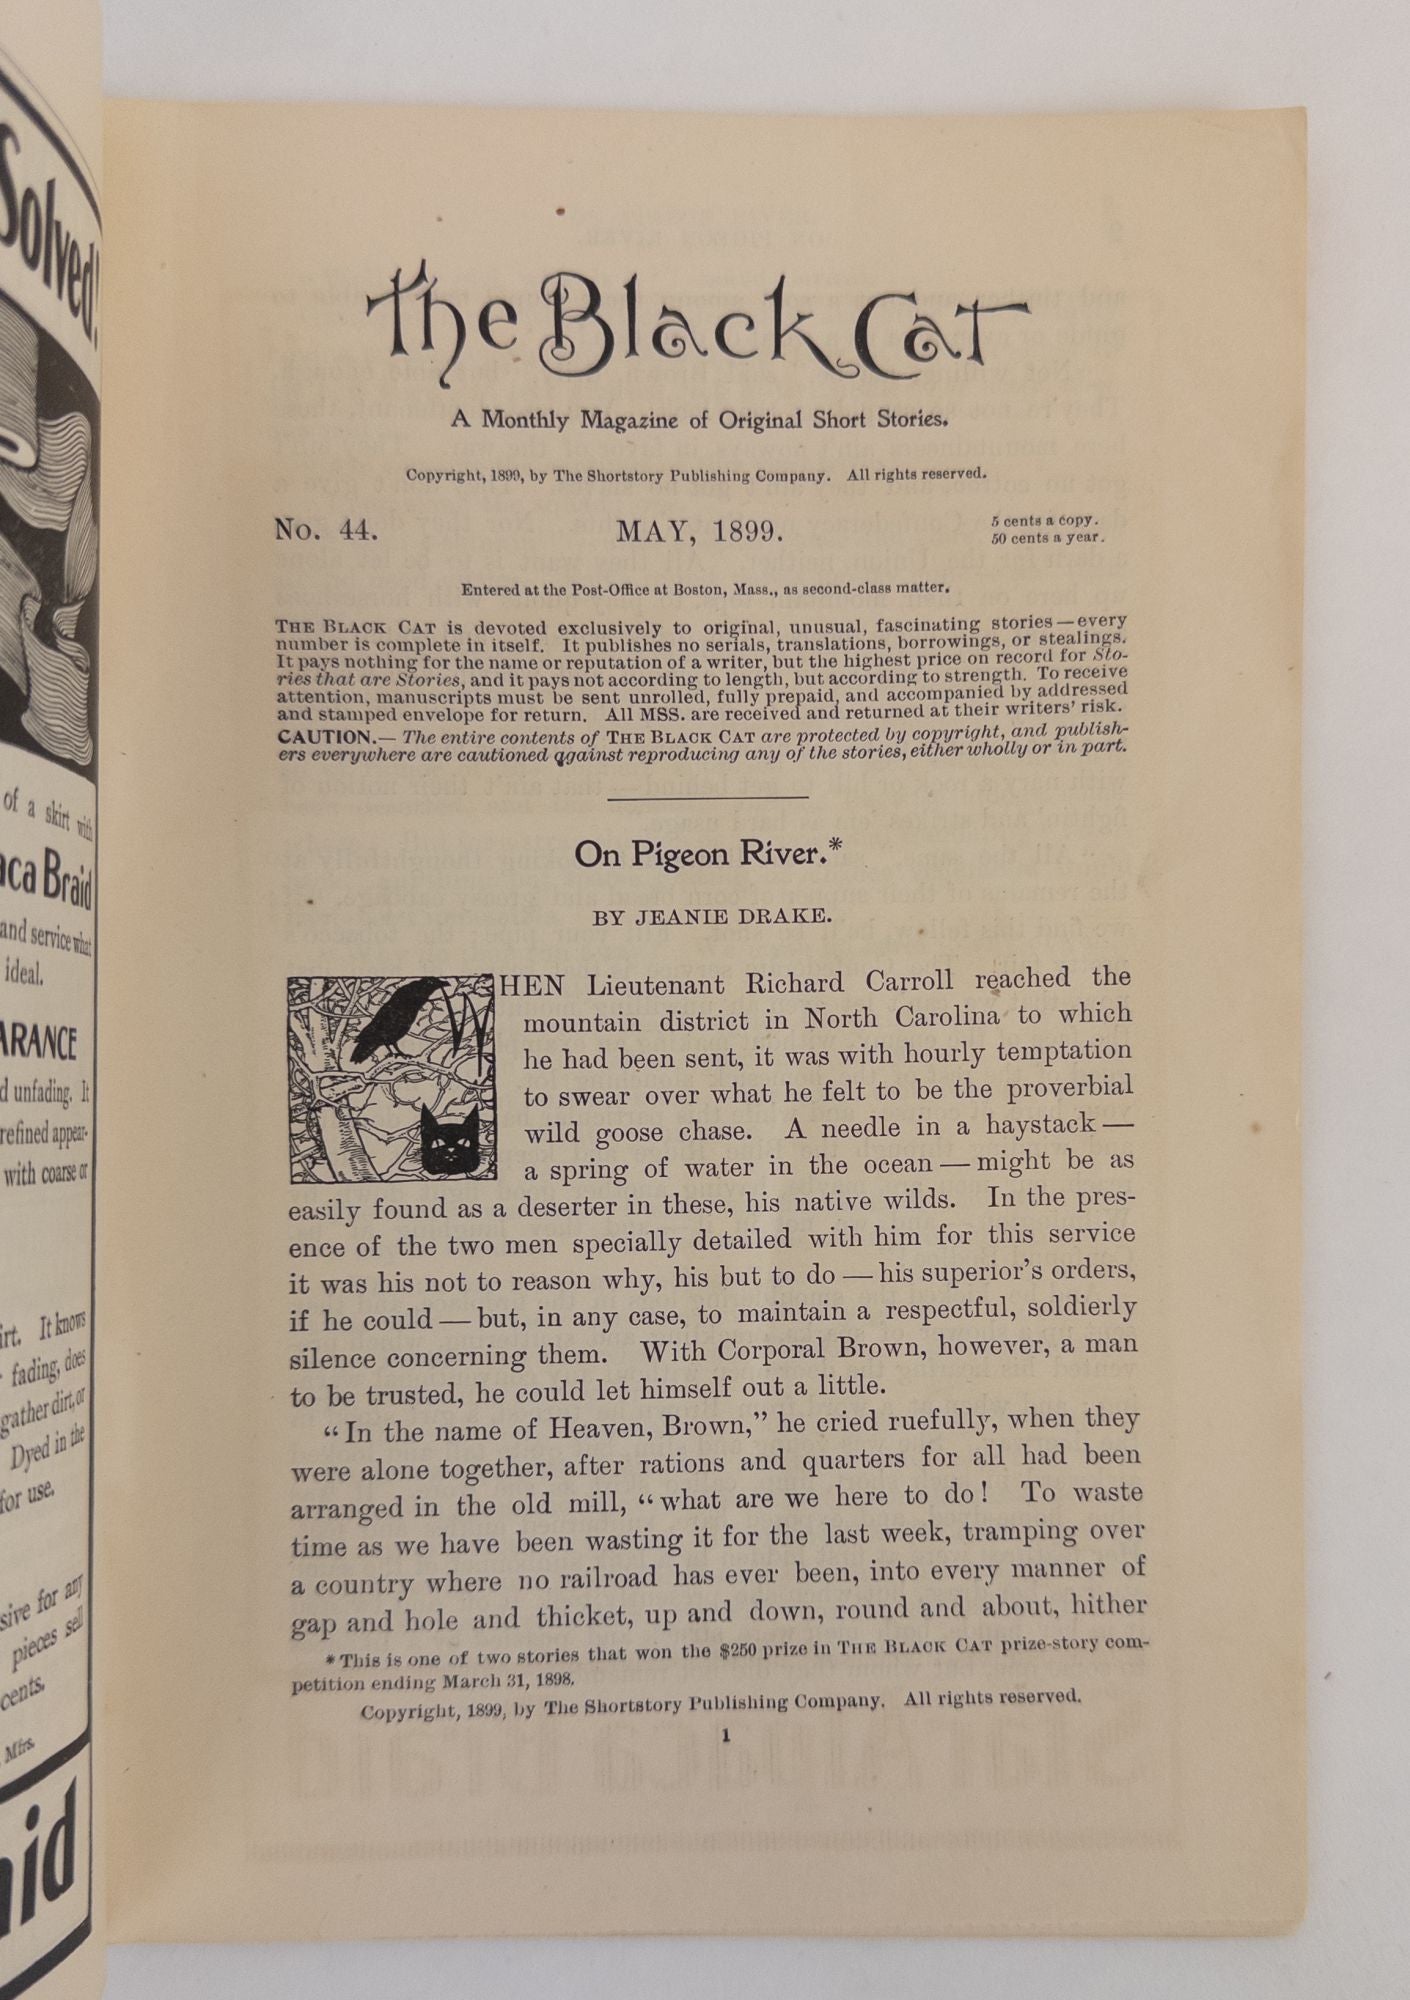 Product Image for A THOUSAND DEATHS - IN THE BLACK CAT, MAY 1899